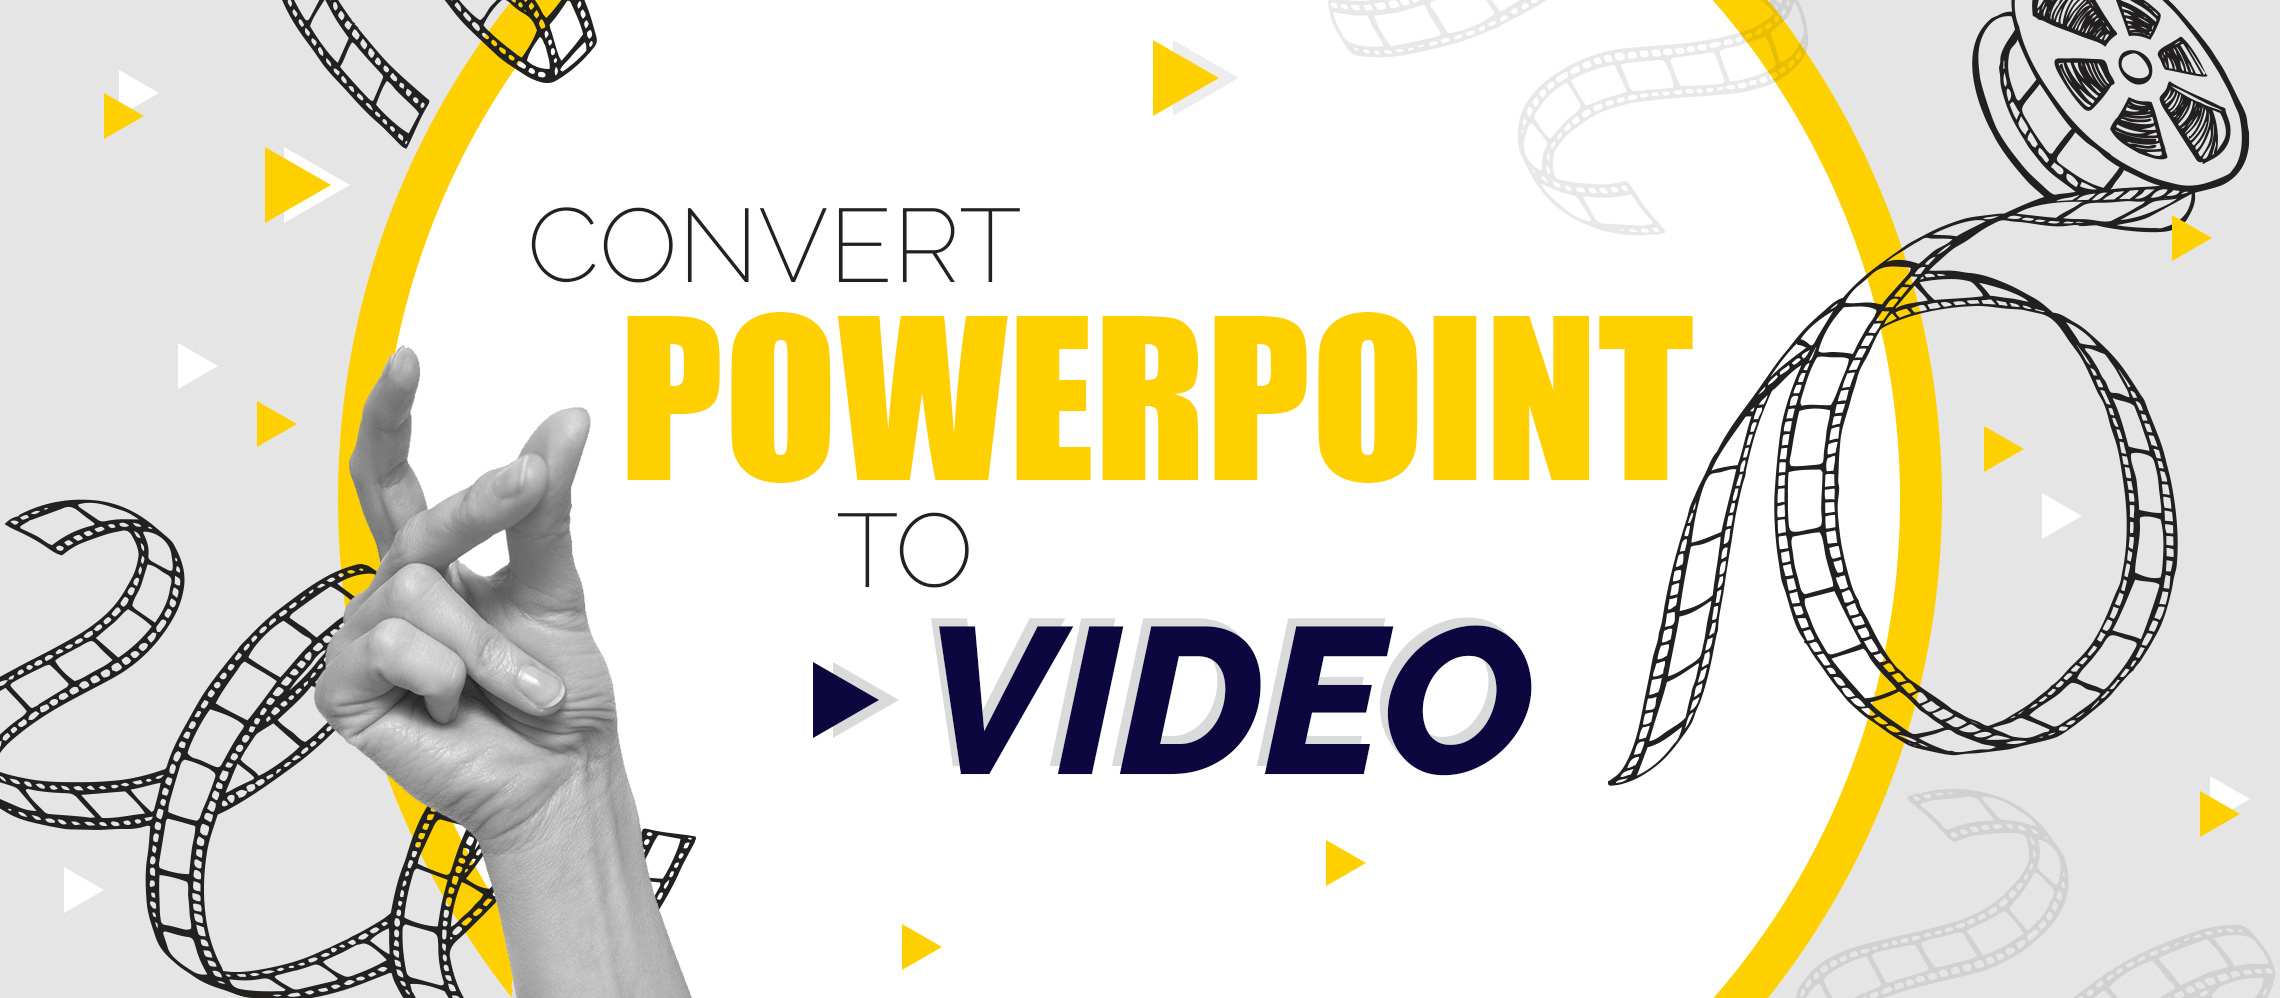 Convert PowerPoint to Video - PowerPoint User Guide | Leawo Tutorial Center